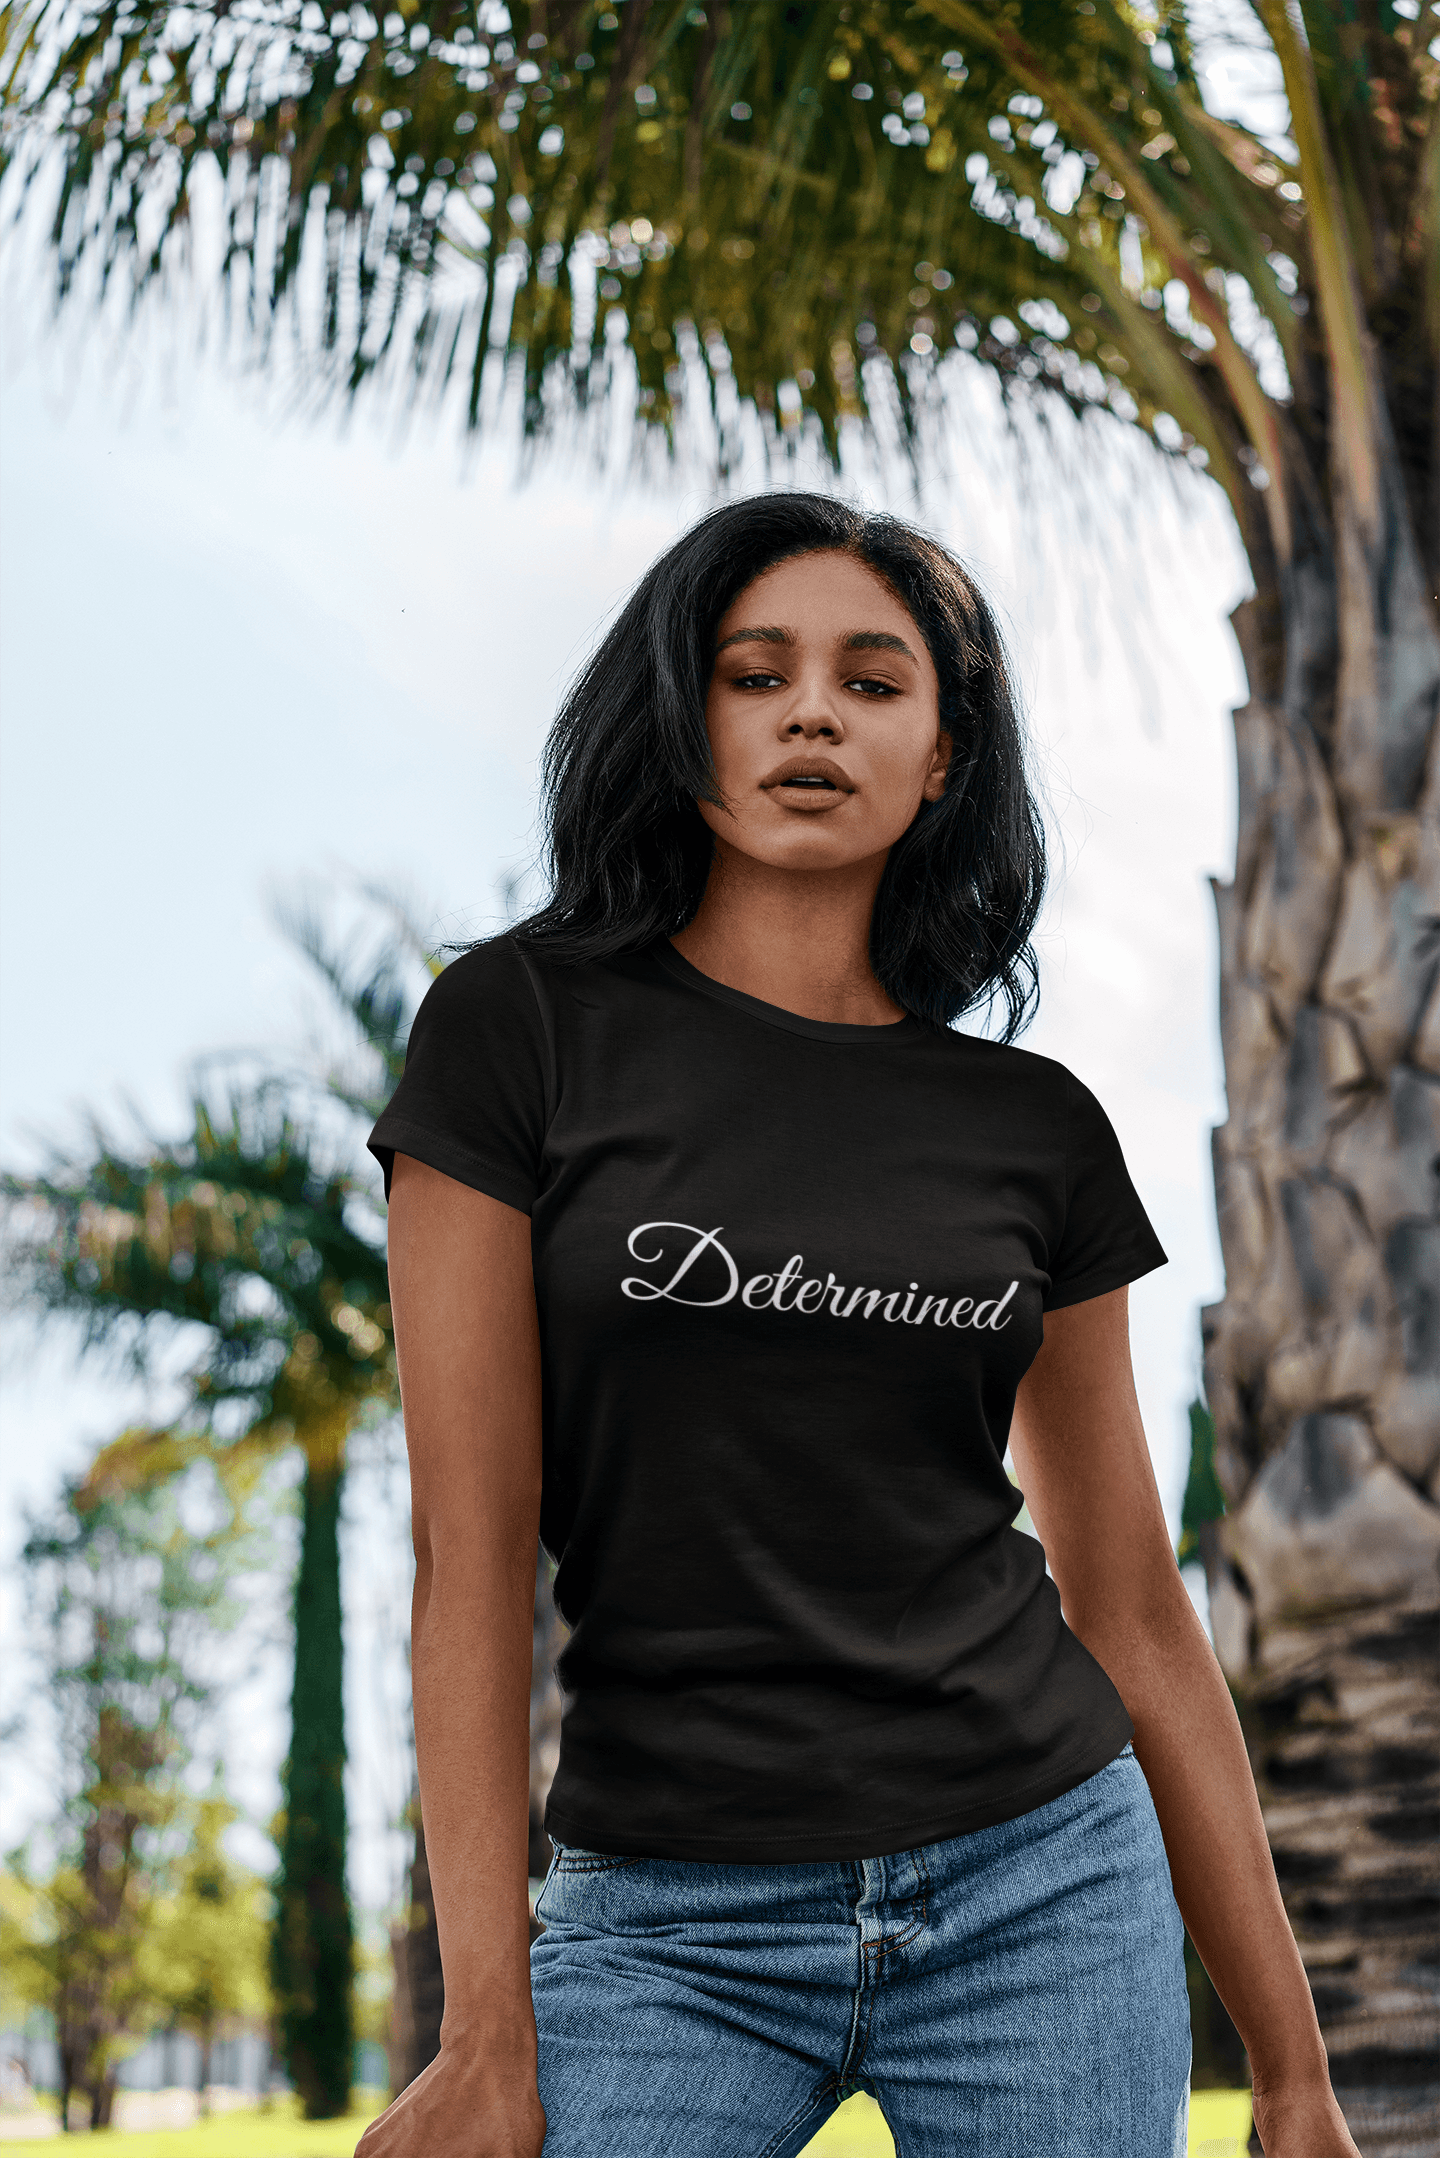 Determined T-Shirt - Women Empowerment T-Shirts & Apparel | CP Designs Unlimited